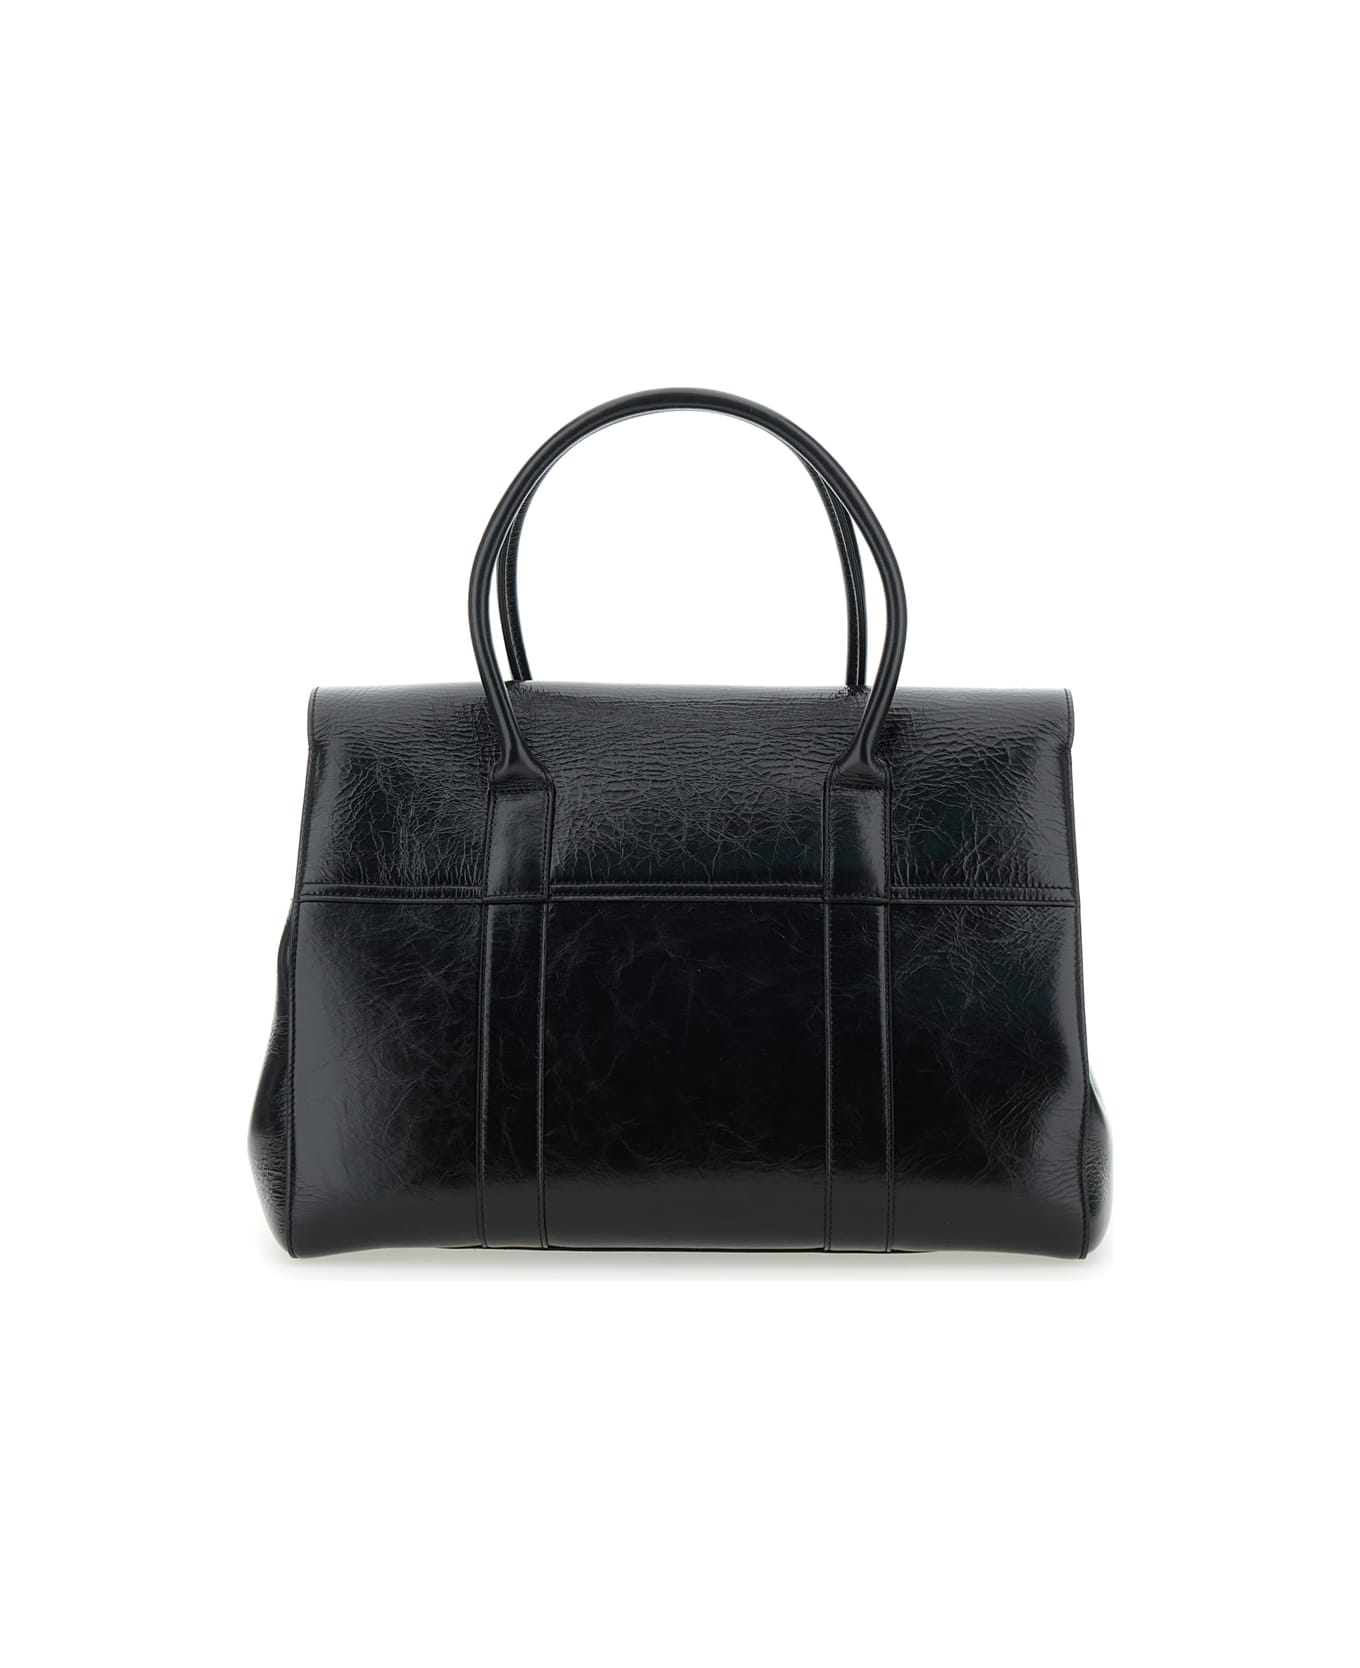 Mulberry 'bayswater' Black Handbag With Postman's Lock Closure In Leather Woman - Black トートバッグ